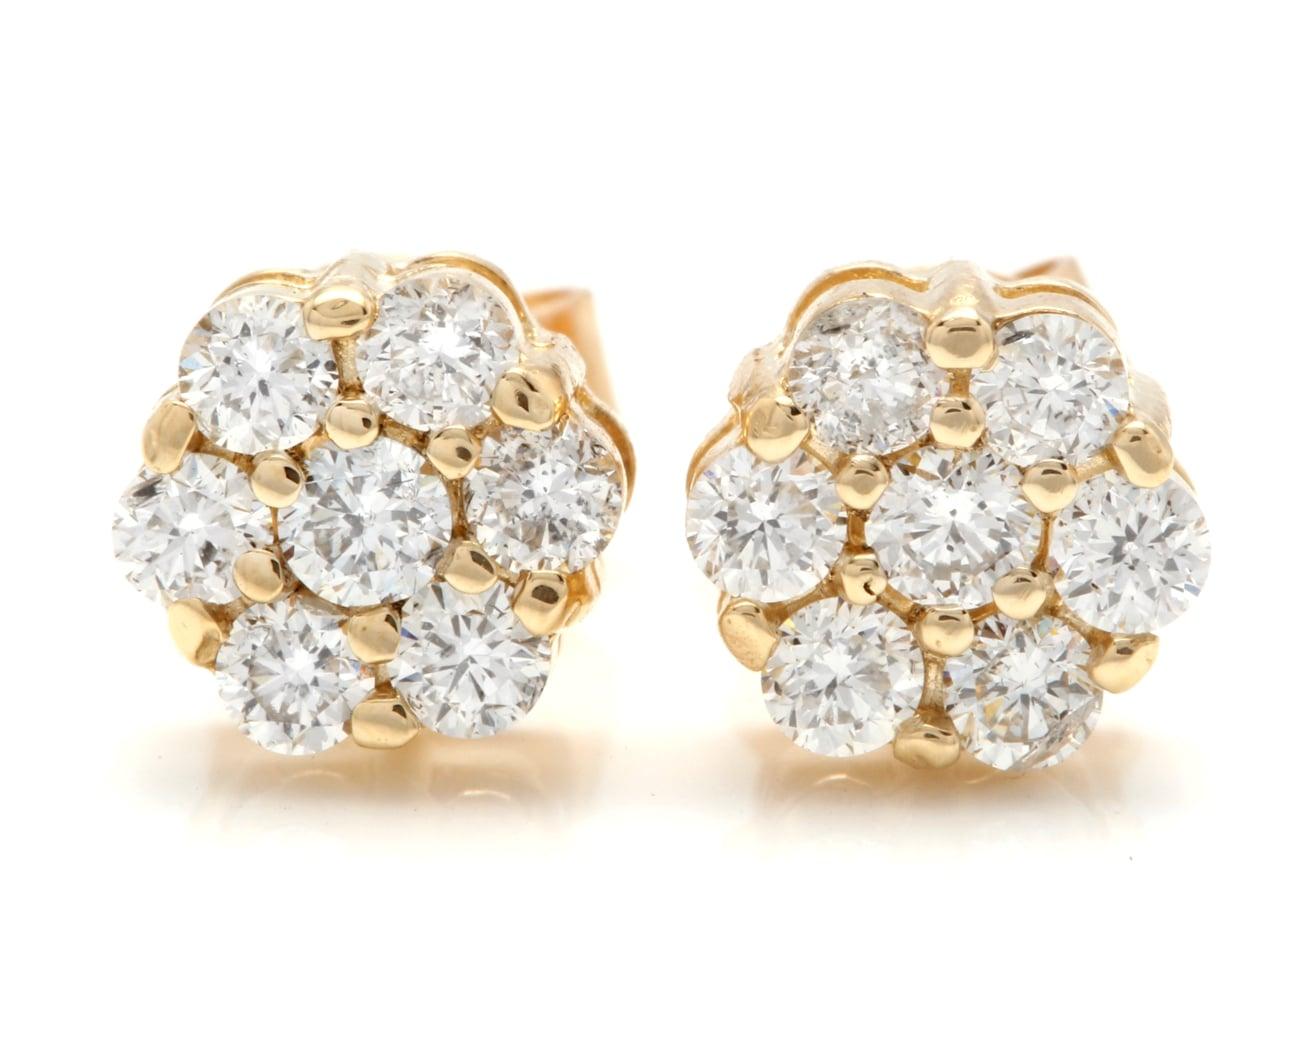 Exquisite 0.90 Carat Natural Diamond 14 Karat Solid Yellow Gold Stud Earrings In New Condition For Sale In Los Angeles, CA